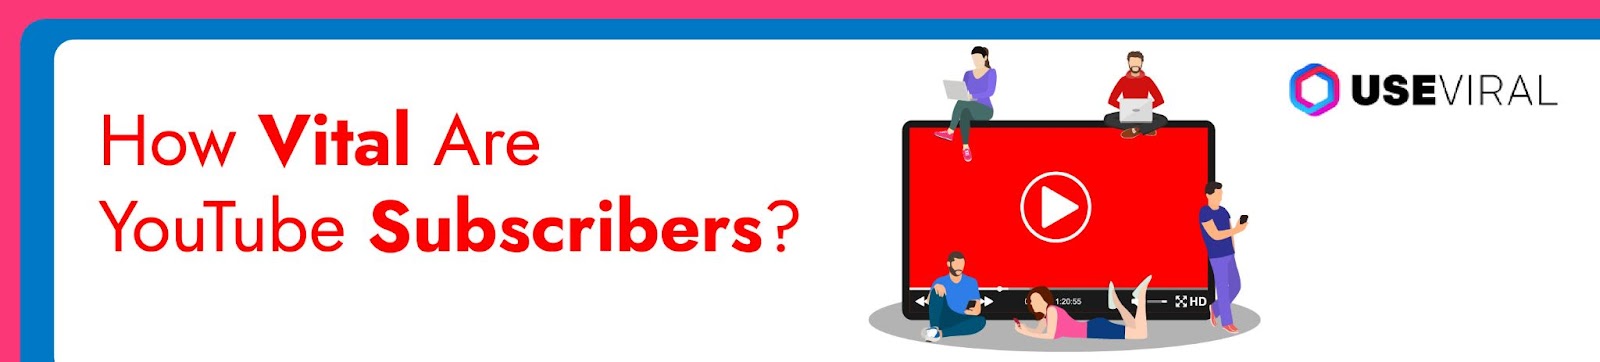 How Vital Are YouTube Subscribers?